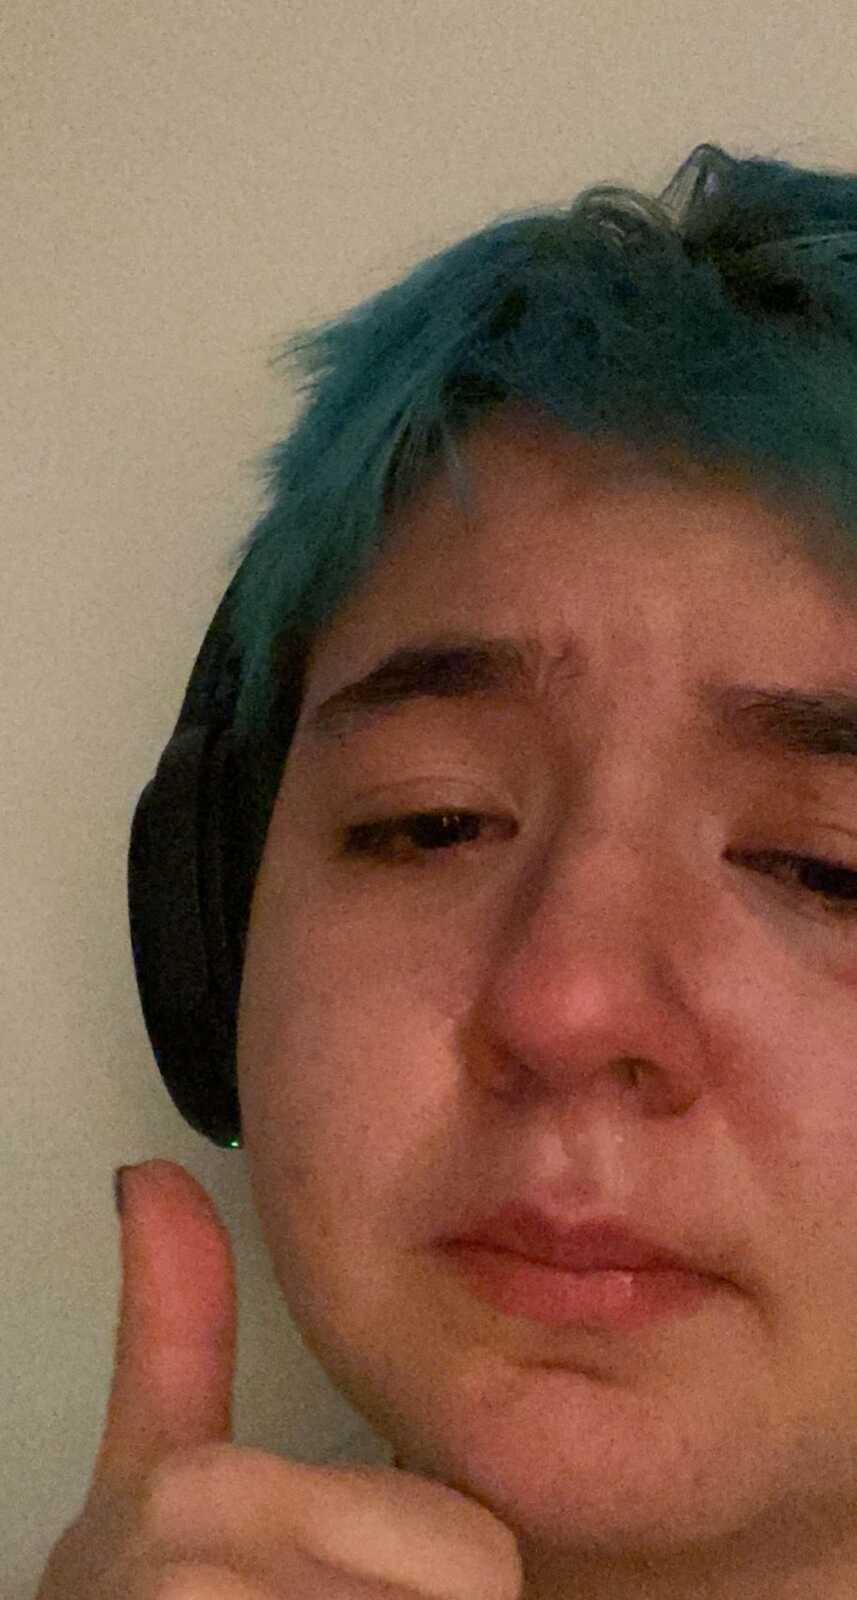 young teen crying